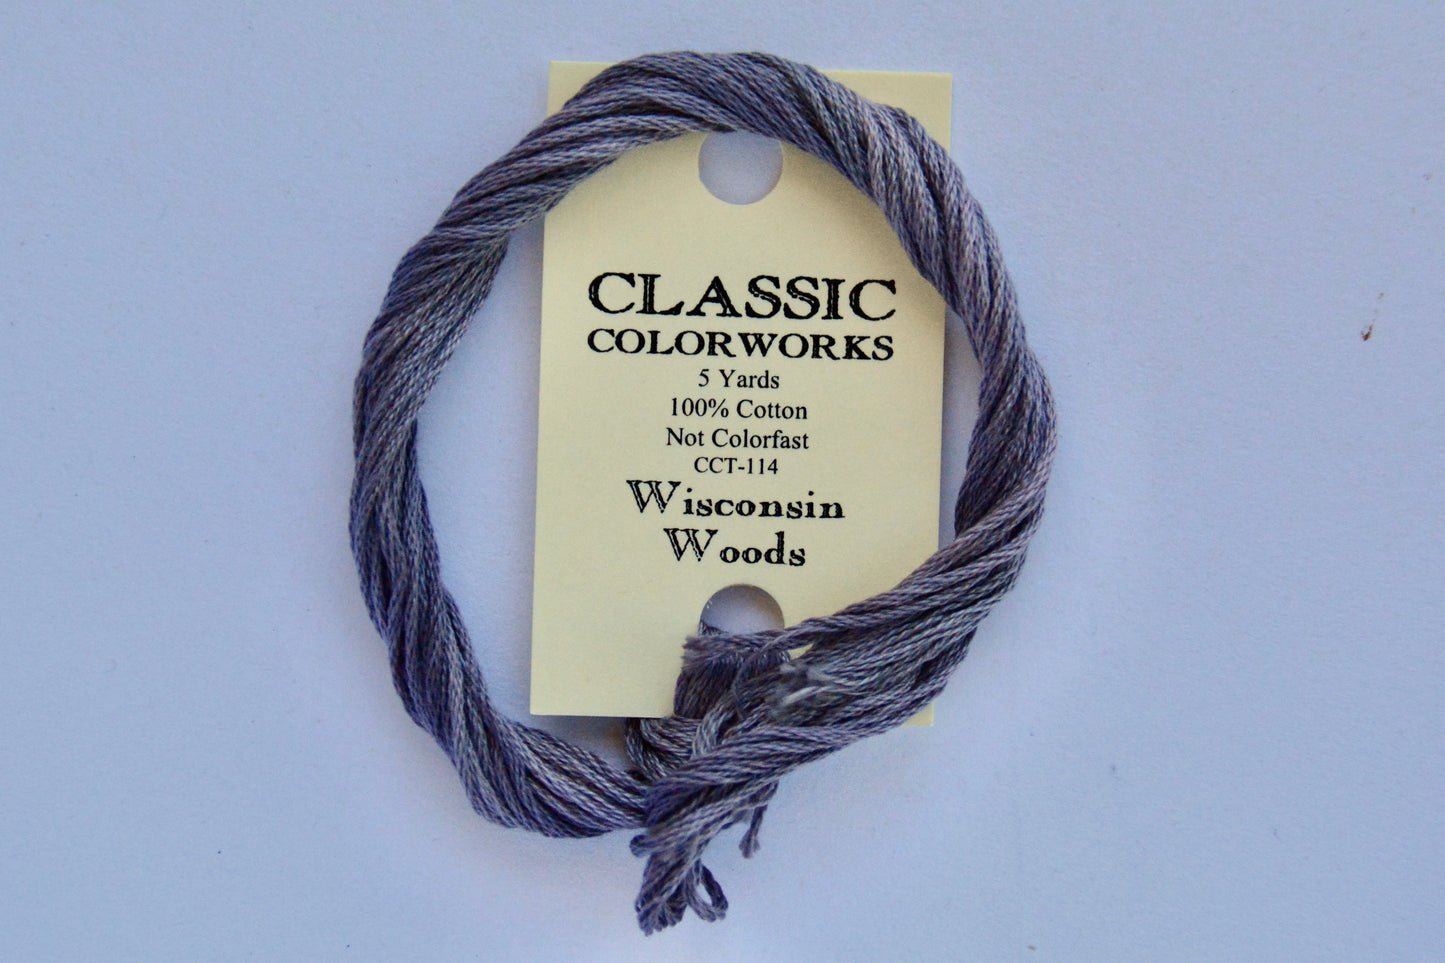 Wisconsin Woods Classic Colorworks 6-Strand Hand-Dyed Embroidery Floss